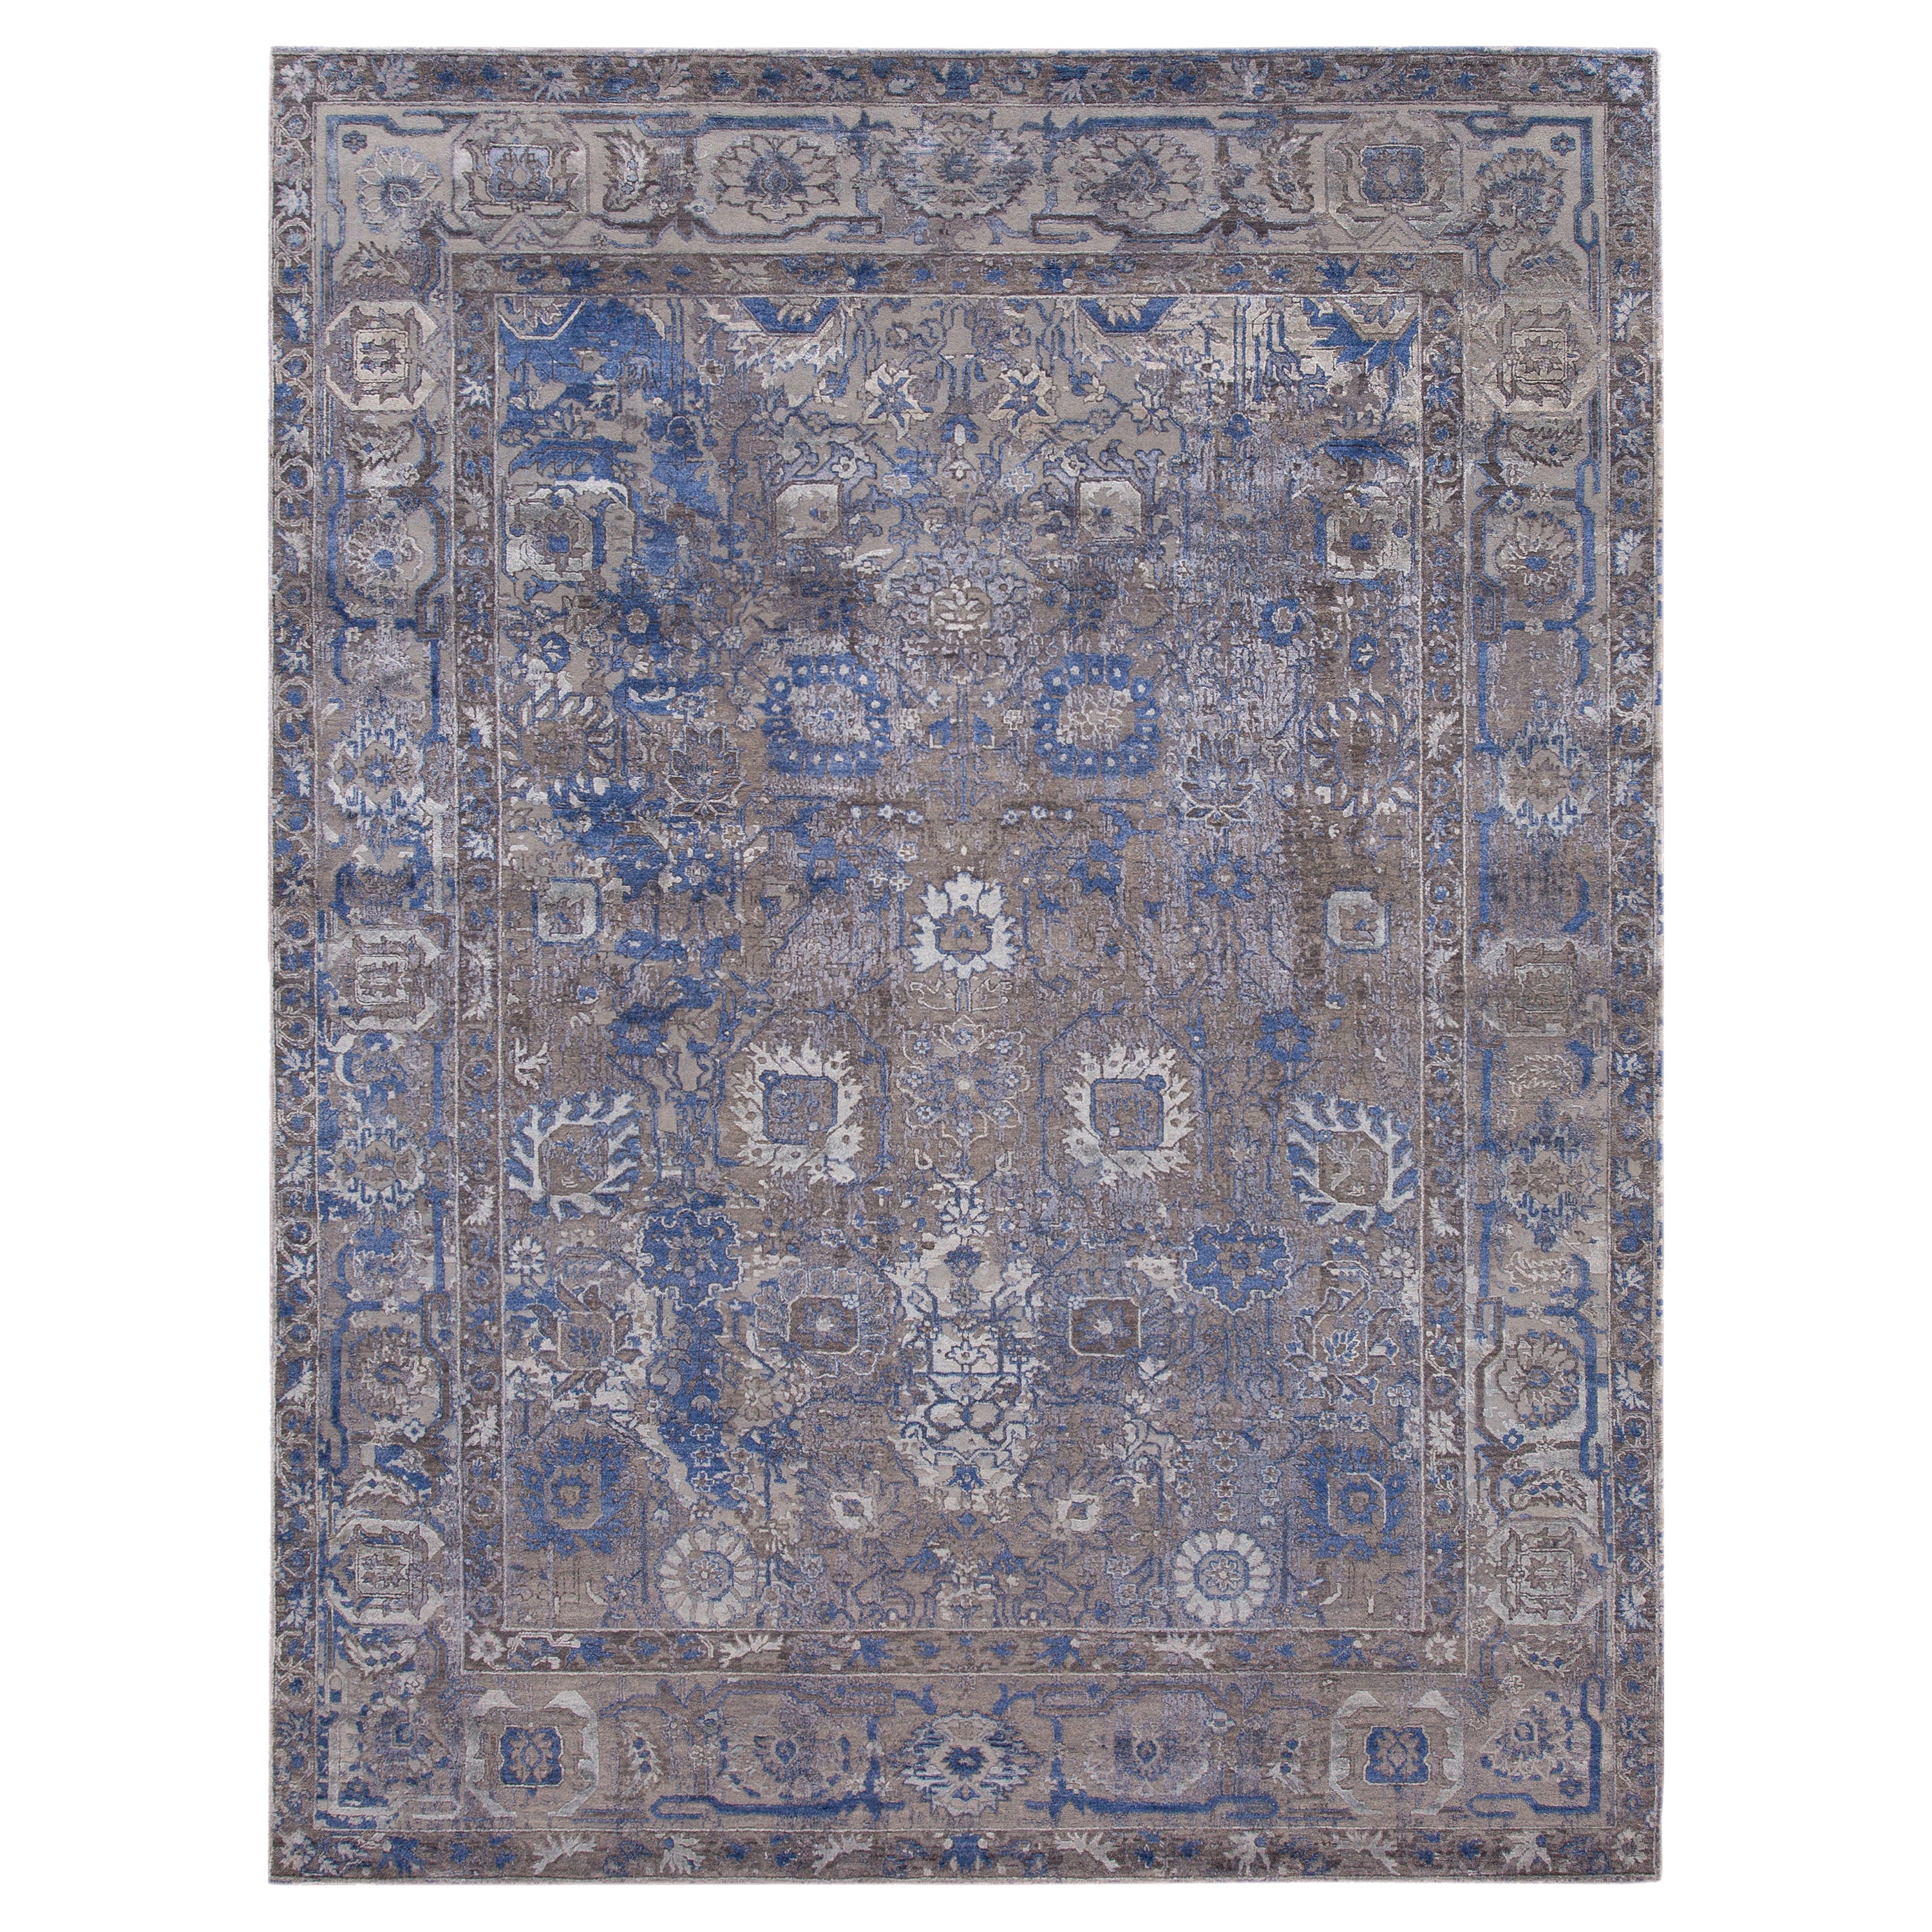 21st Century Mahal Style Wool Rug With Gray And Blue Design